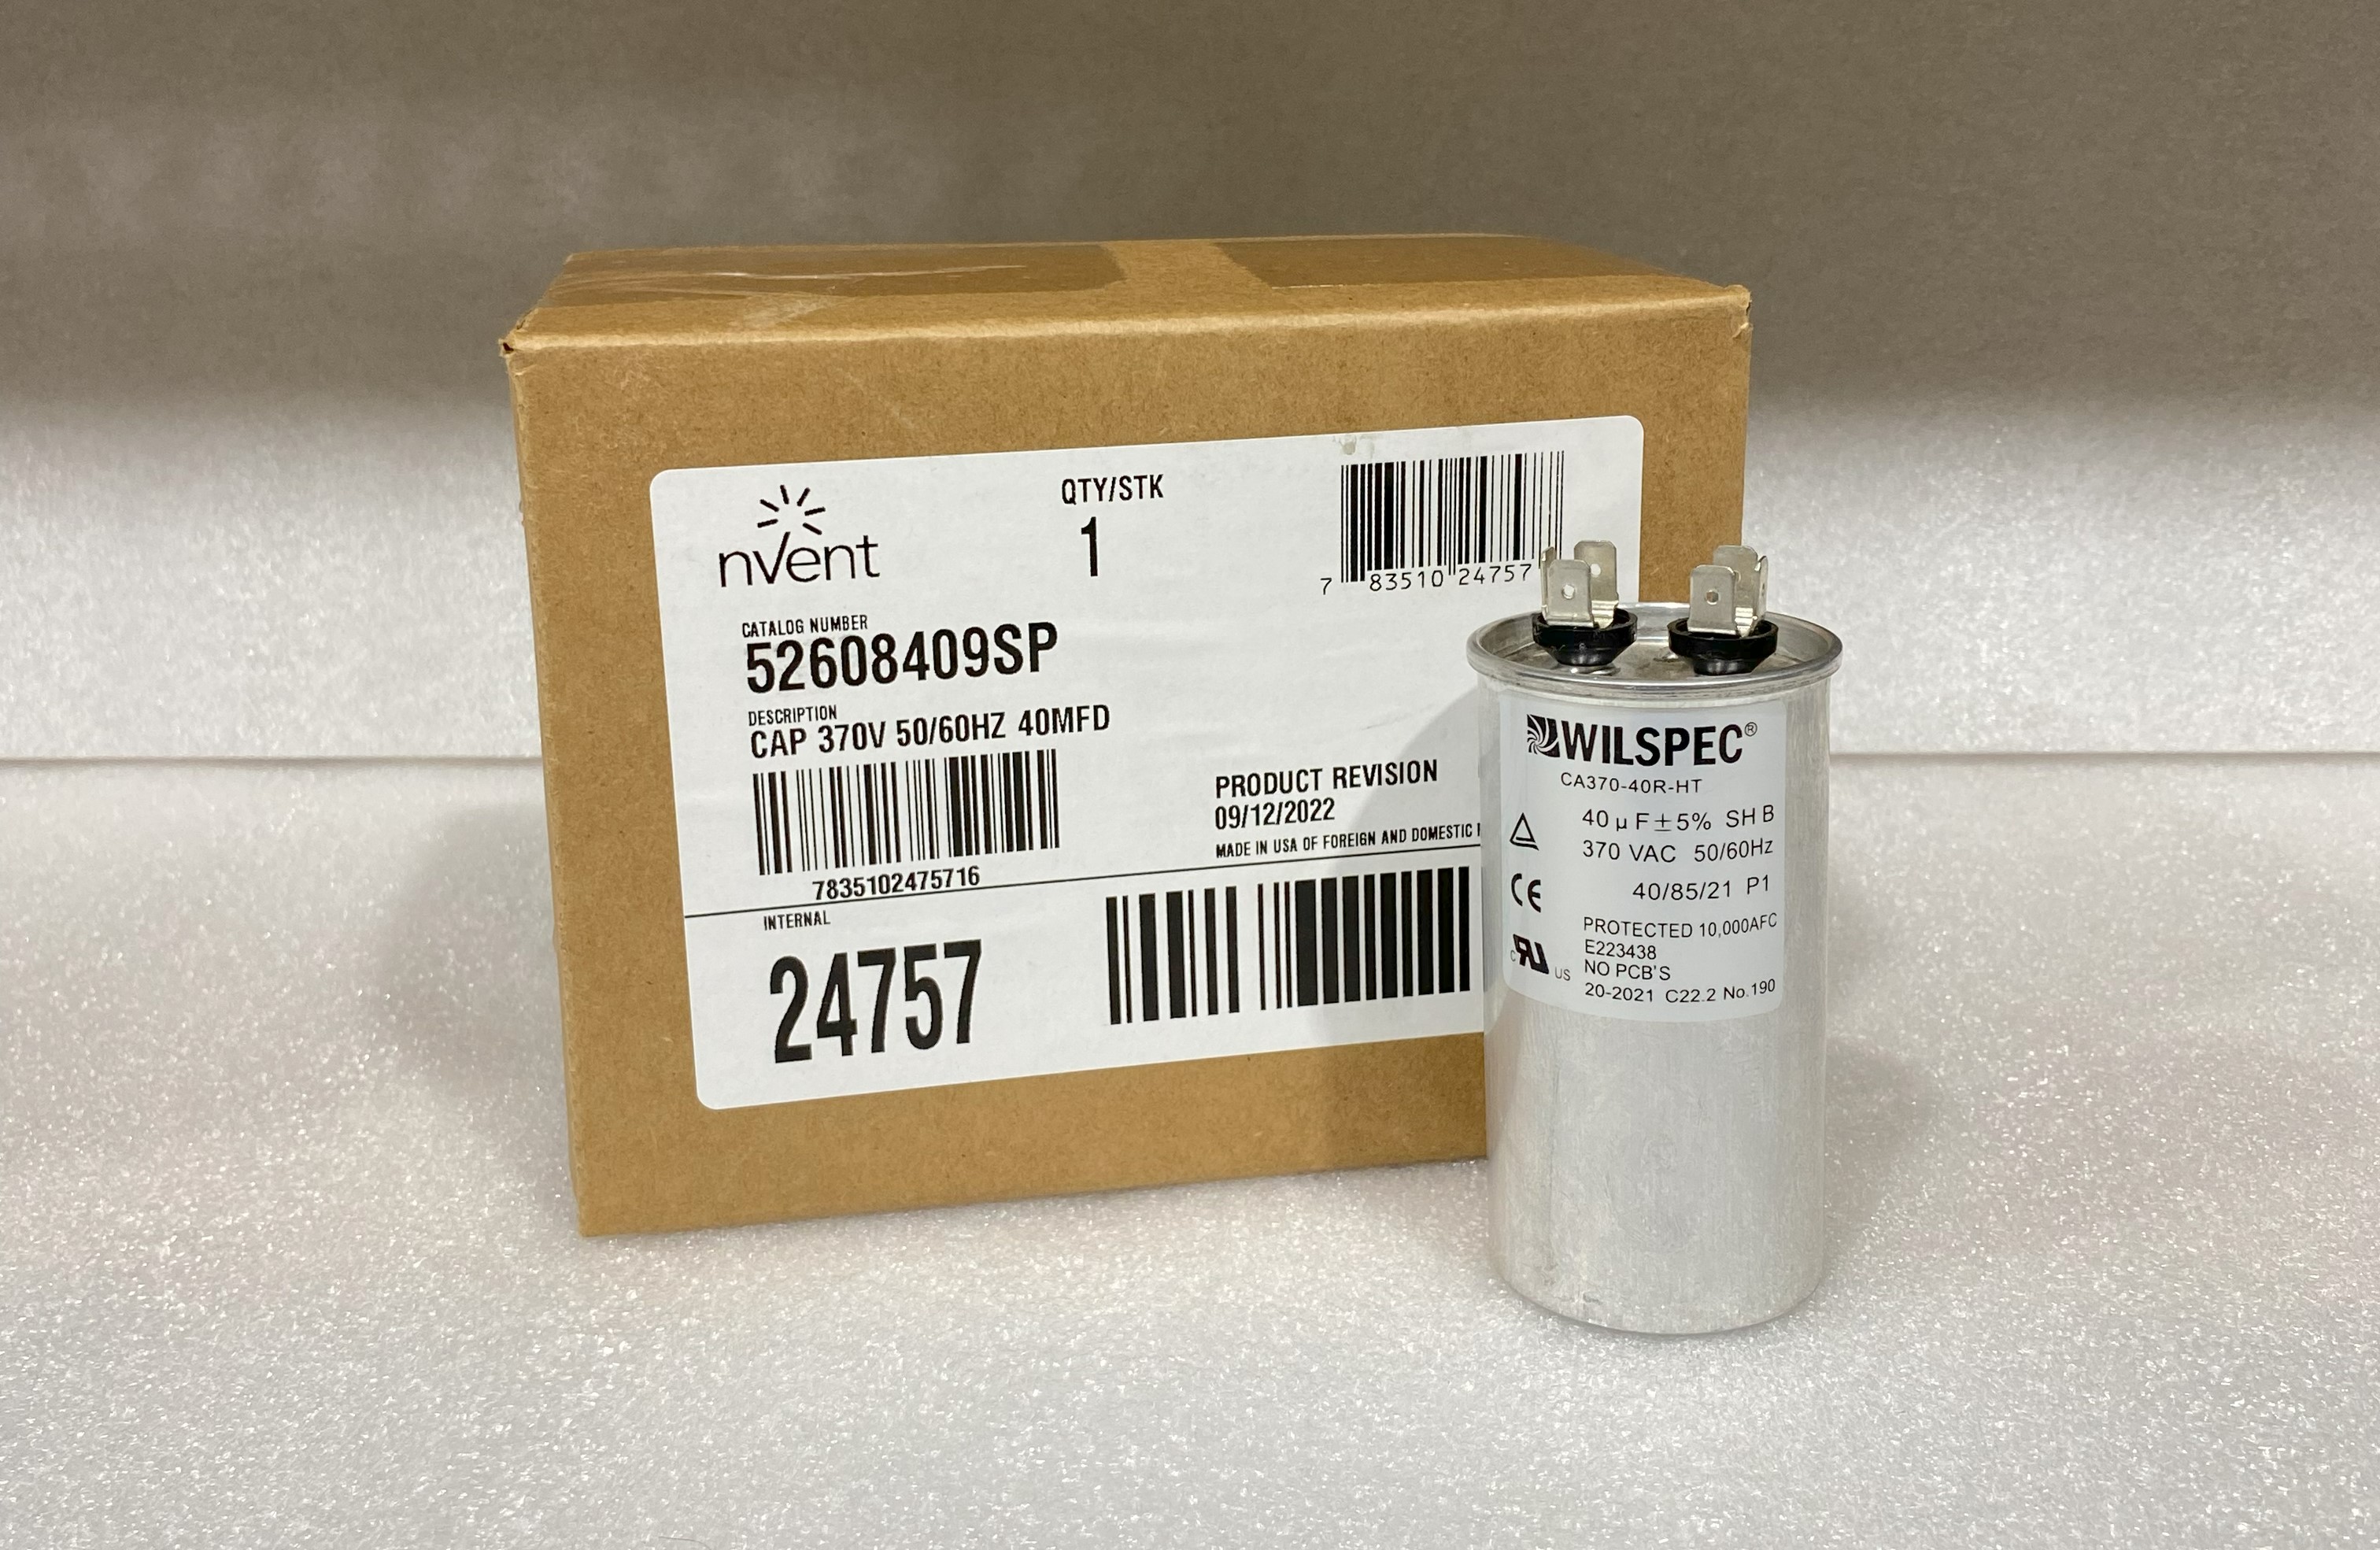 nVent 52608409SP Capacitor